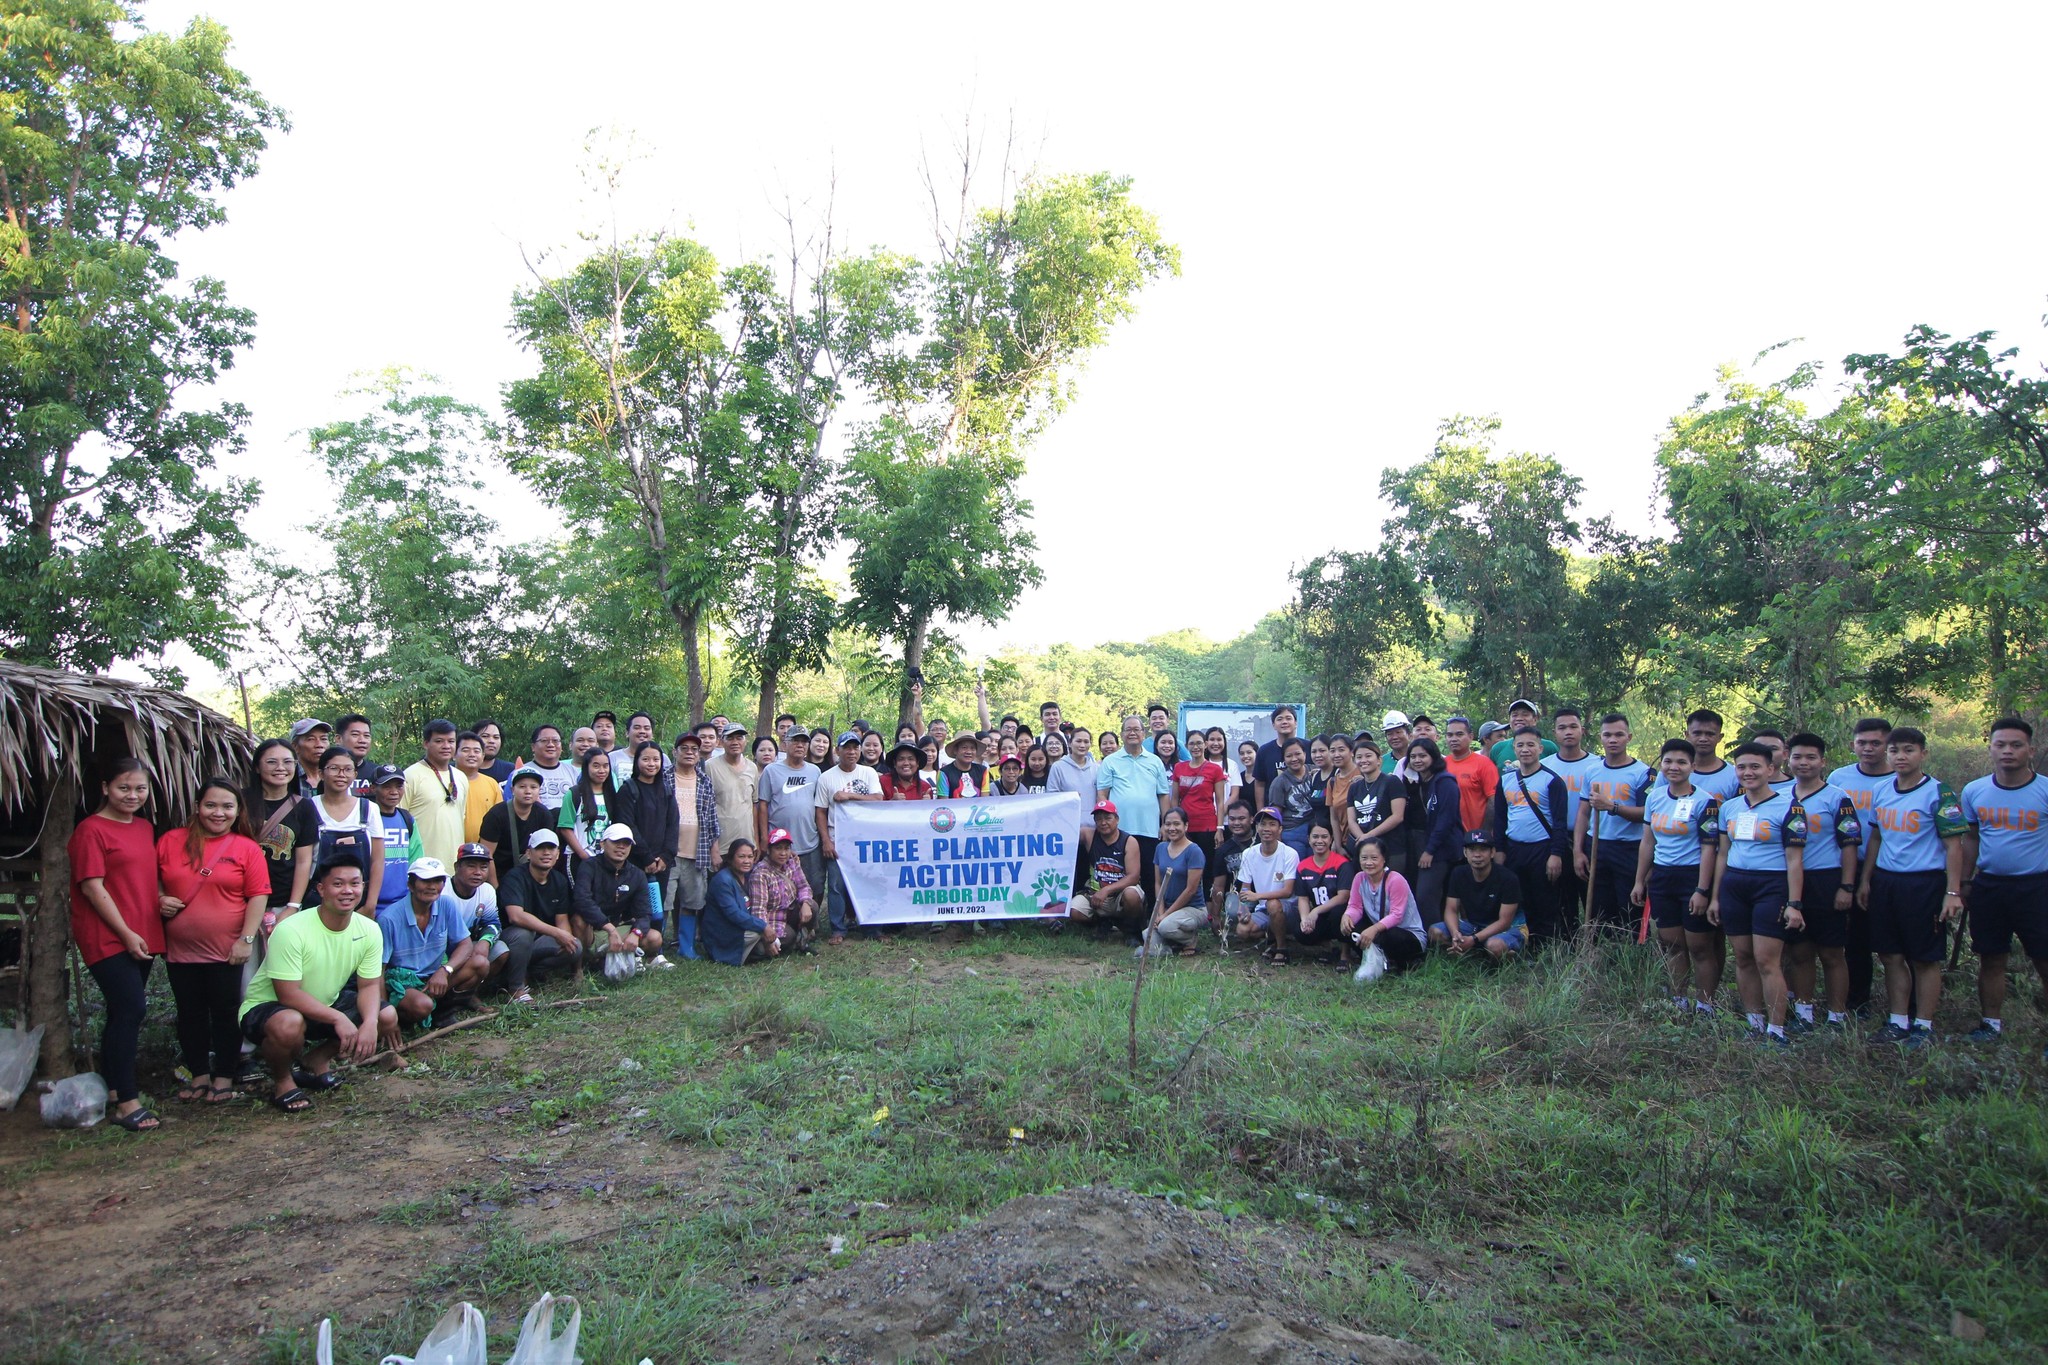 CGB CONDUCTS TREE PLANTING ACTIVITY IN CELEBRATION OF 16TH CHARTER DAY AND ARBOR DAY